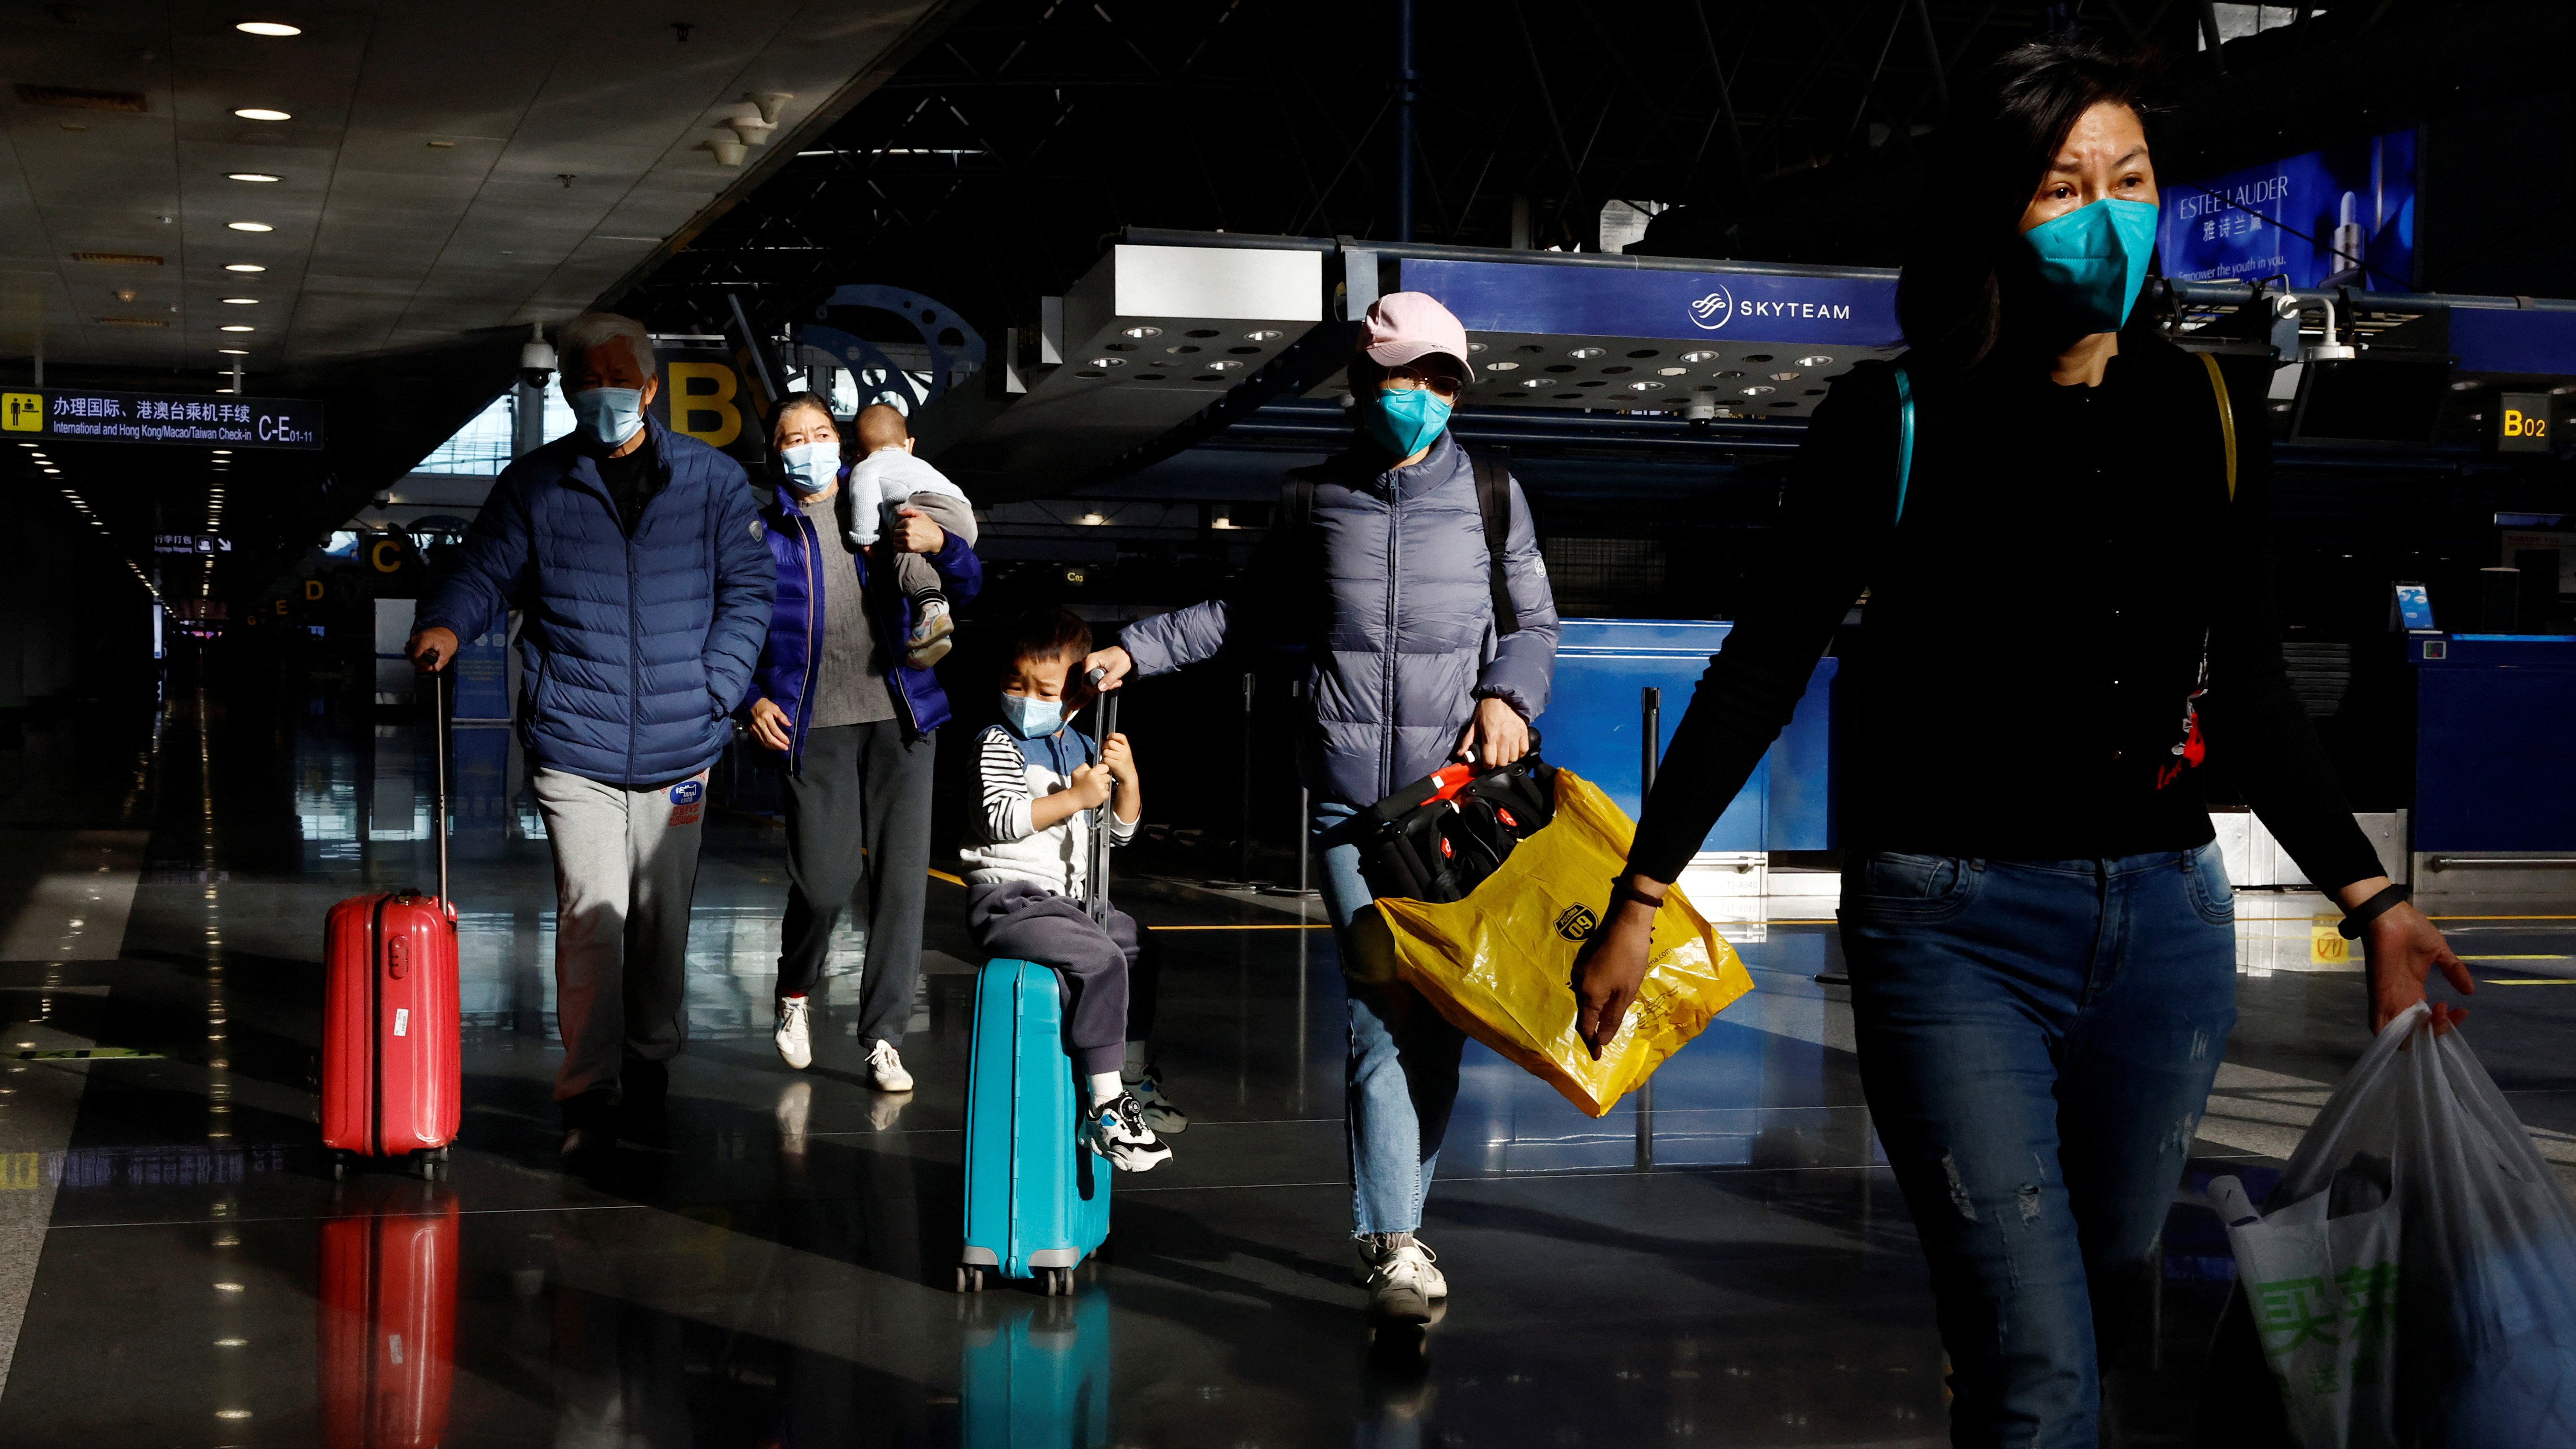 Commentary: U.S. travel curbs on Chinese travelers are political farce